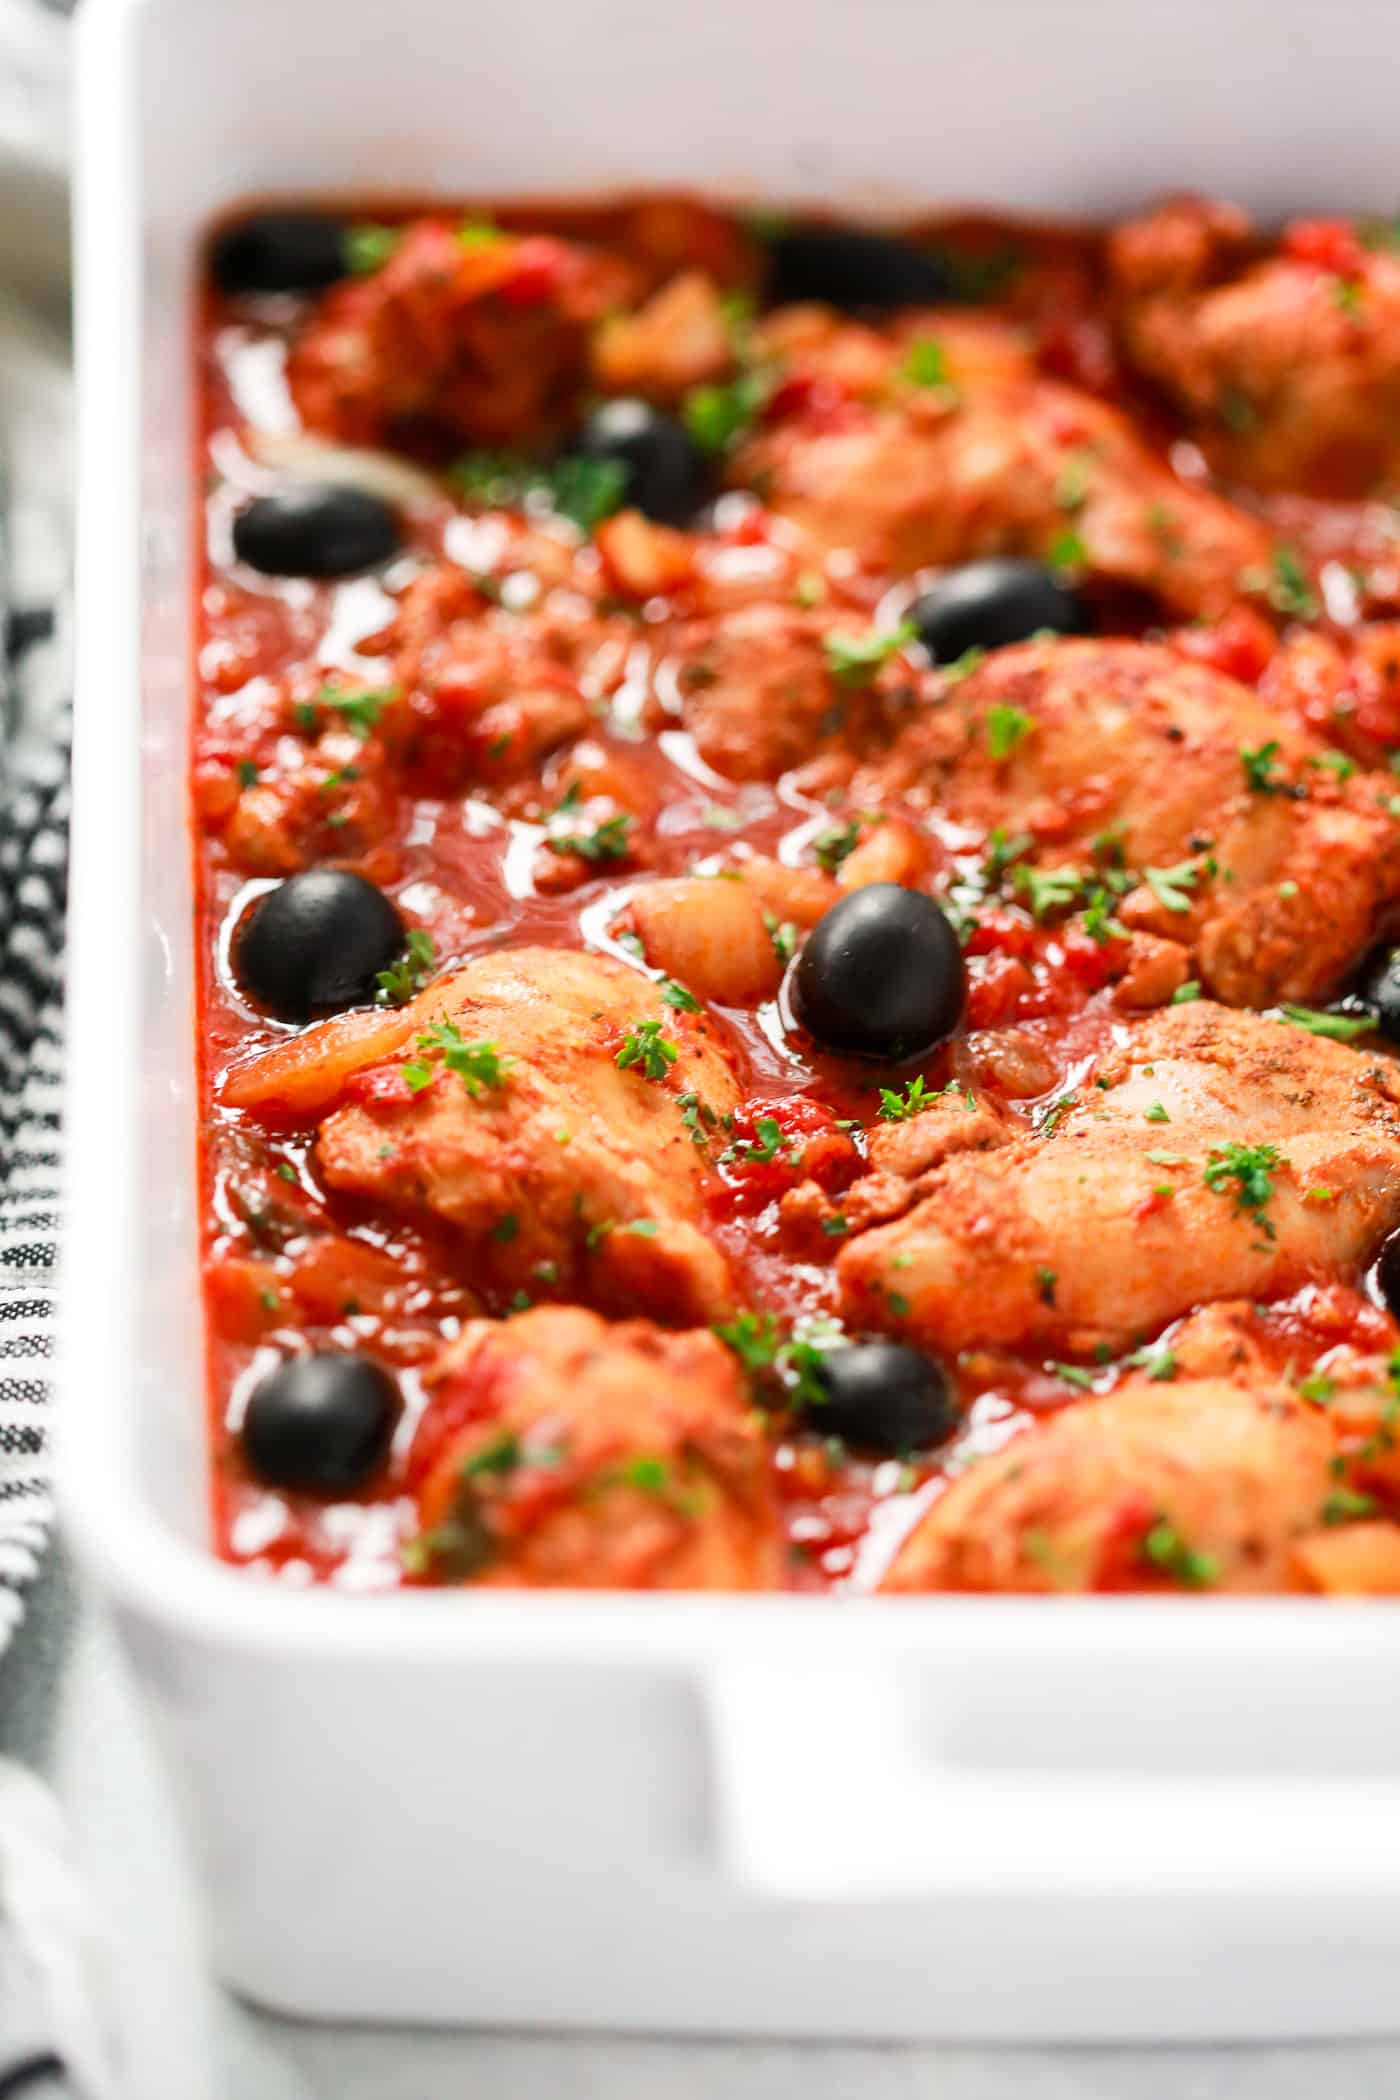 Chicken with tomato sauce in a white serving dish
